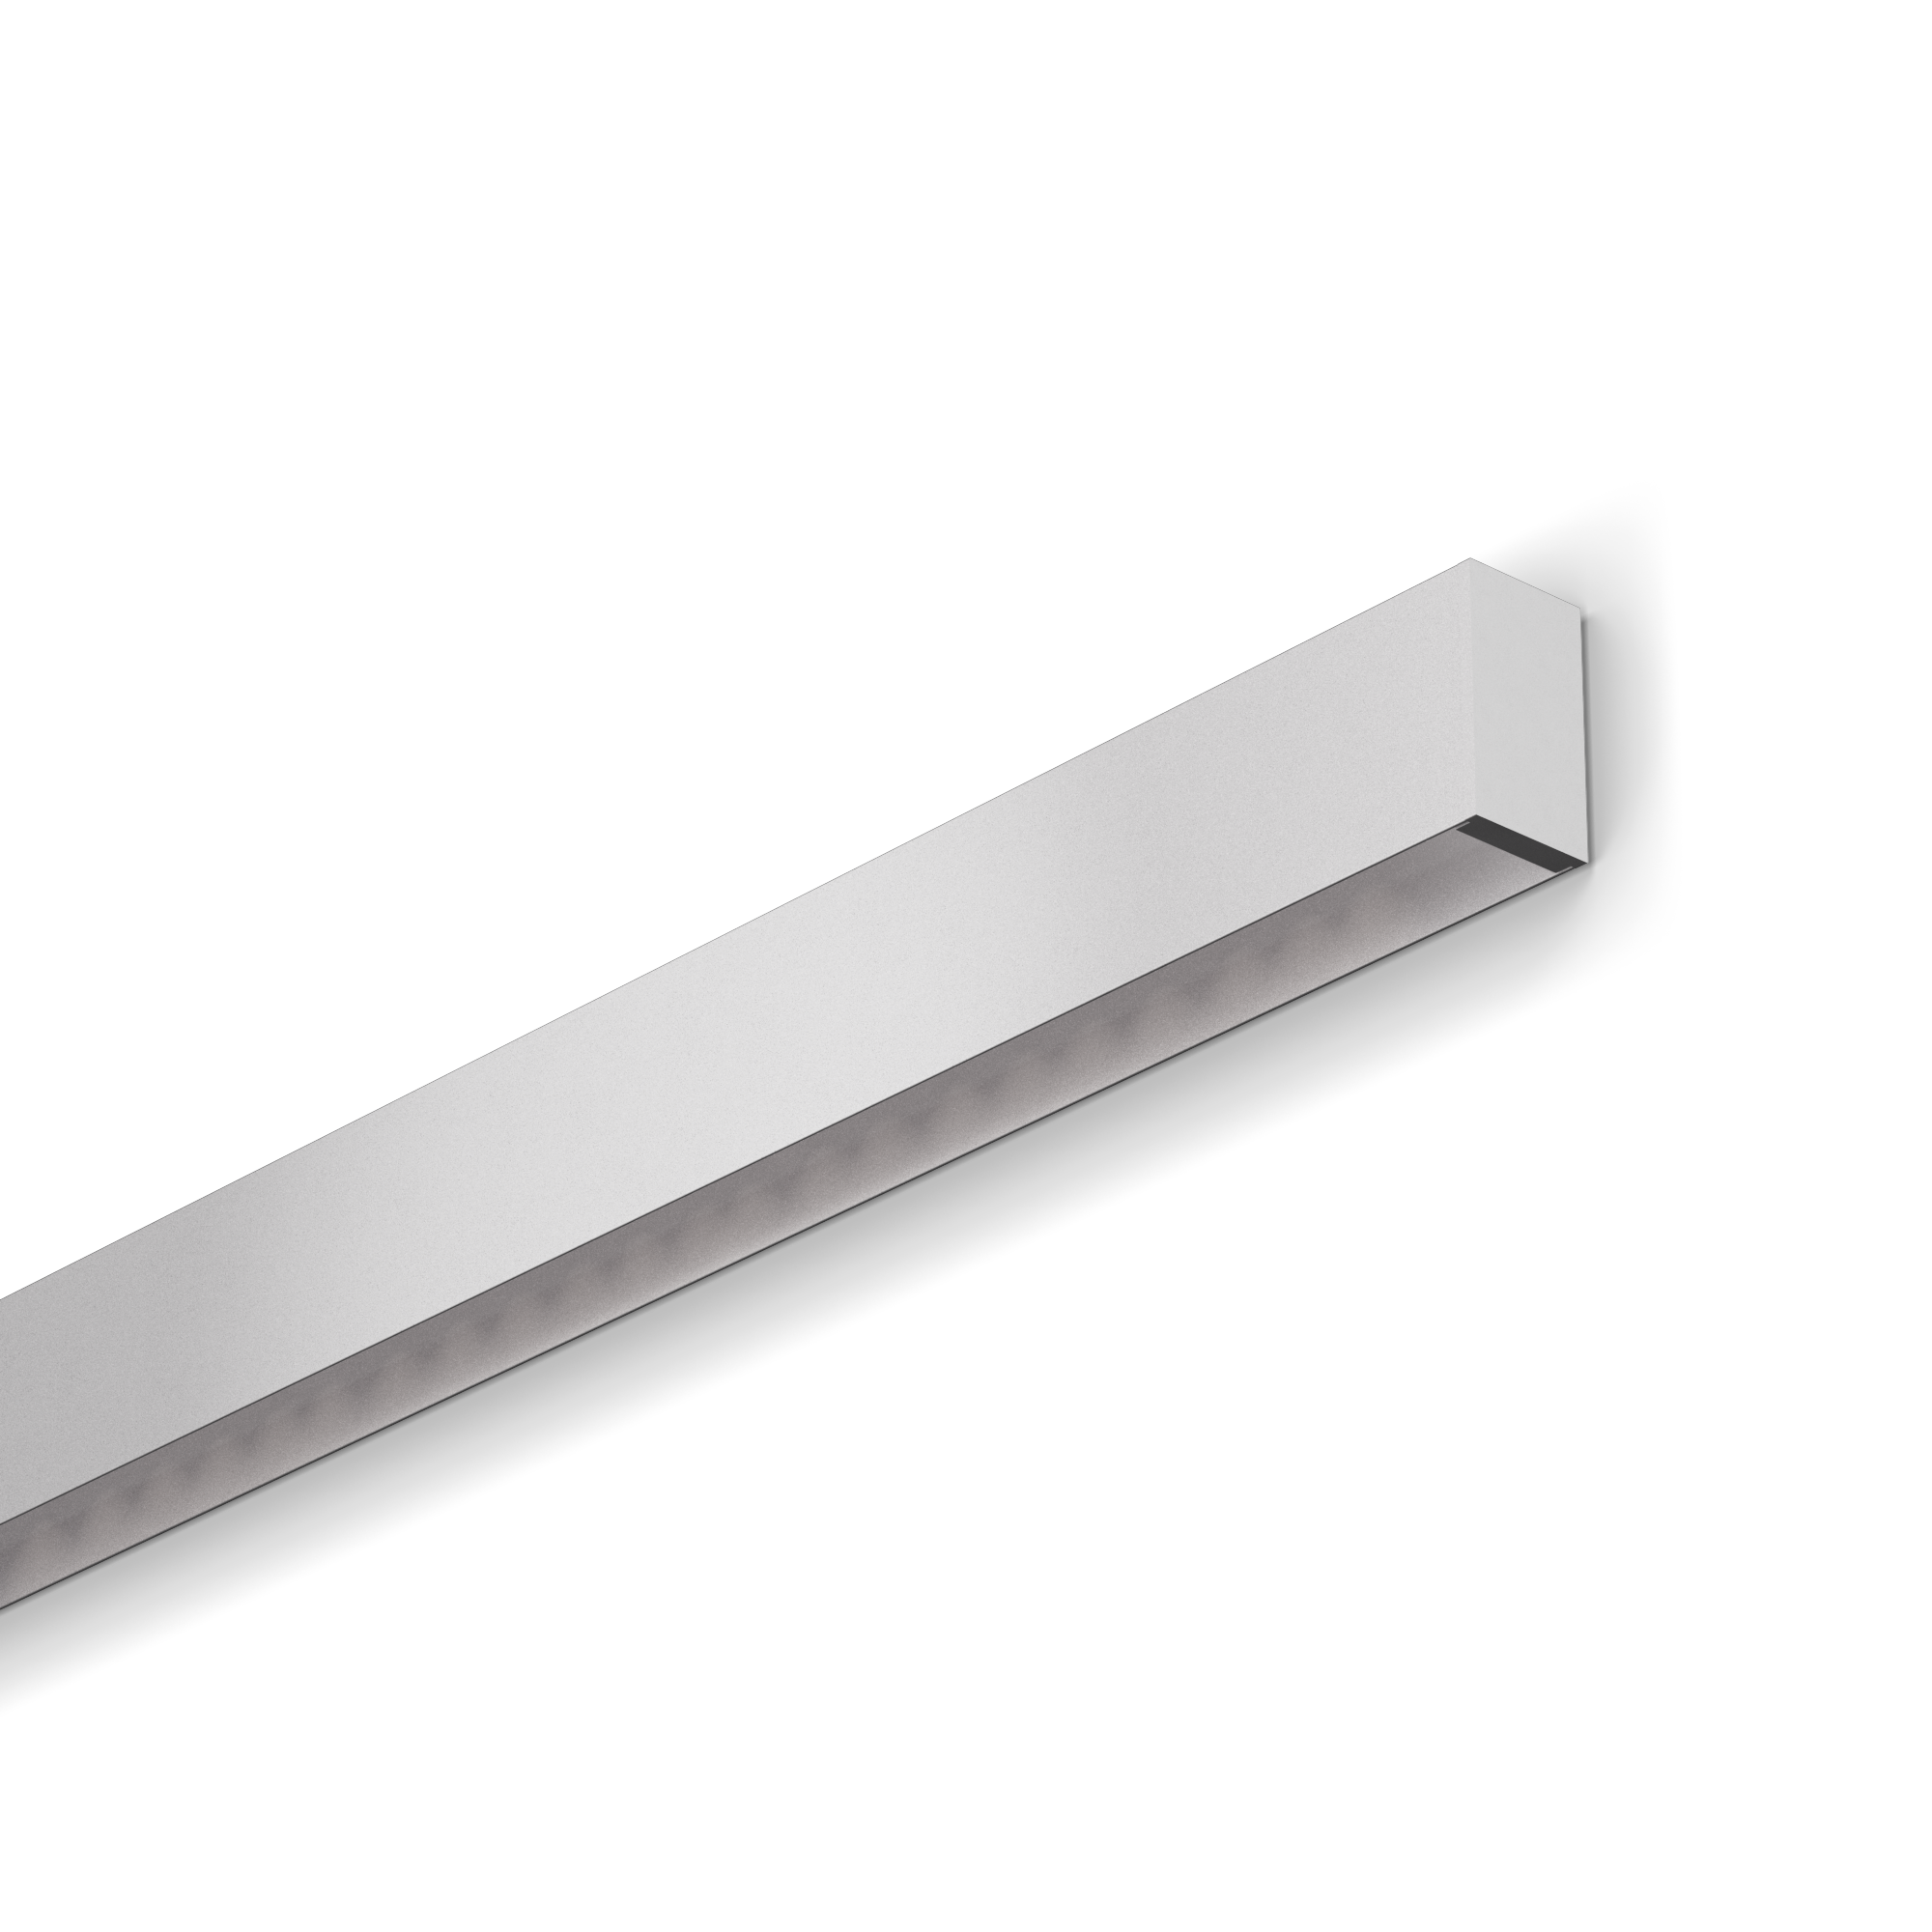 0.95” Ultra-Compact LED Linear
NANOBeam is 0.95” wide, bringing regressed SmartBeam® capabilities to a wall-mounted form factor that complements architectural space. NANOBeam features a remote driver to remove visual bulk. Optional Individual lenses and parabolic reflectors are located below each LED using Nano-Cavity Optics (NCO). For greater comfort, the regulated beam lowers glare and adjusts the light output. These concentrated distributions are ideal for a wide range of task-specific requirements. At cut-off, NCO has a softer appearance, a larger beam spread, and a gradual brightness transition.

 

Beam profile: 0.95” (24mm) x 1.73” (44mm)